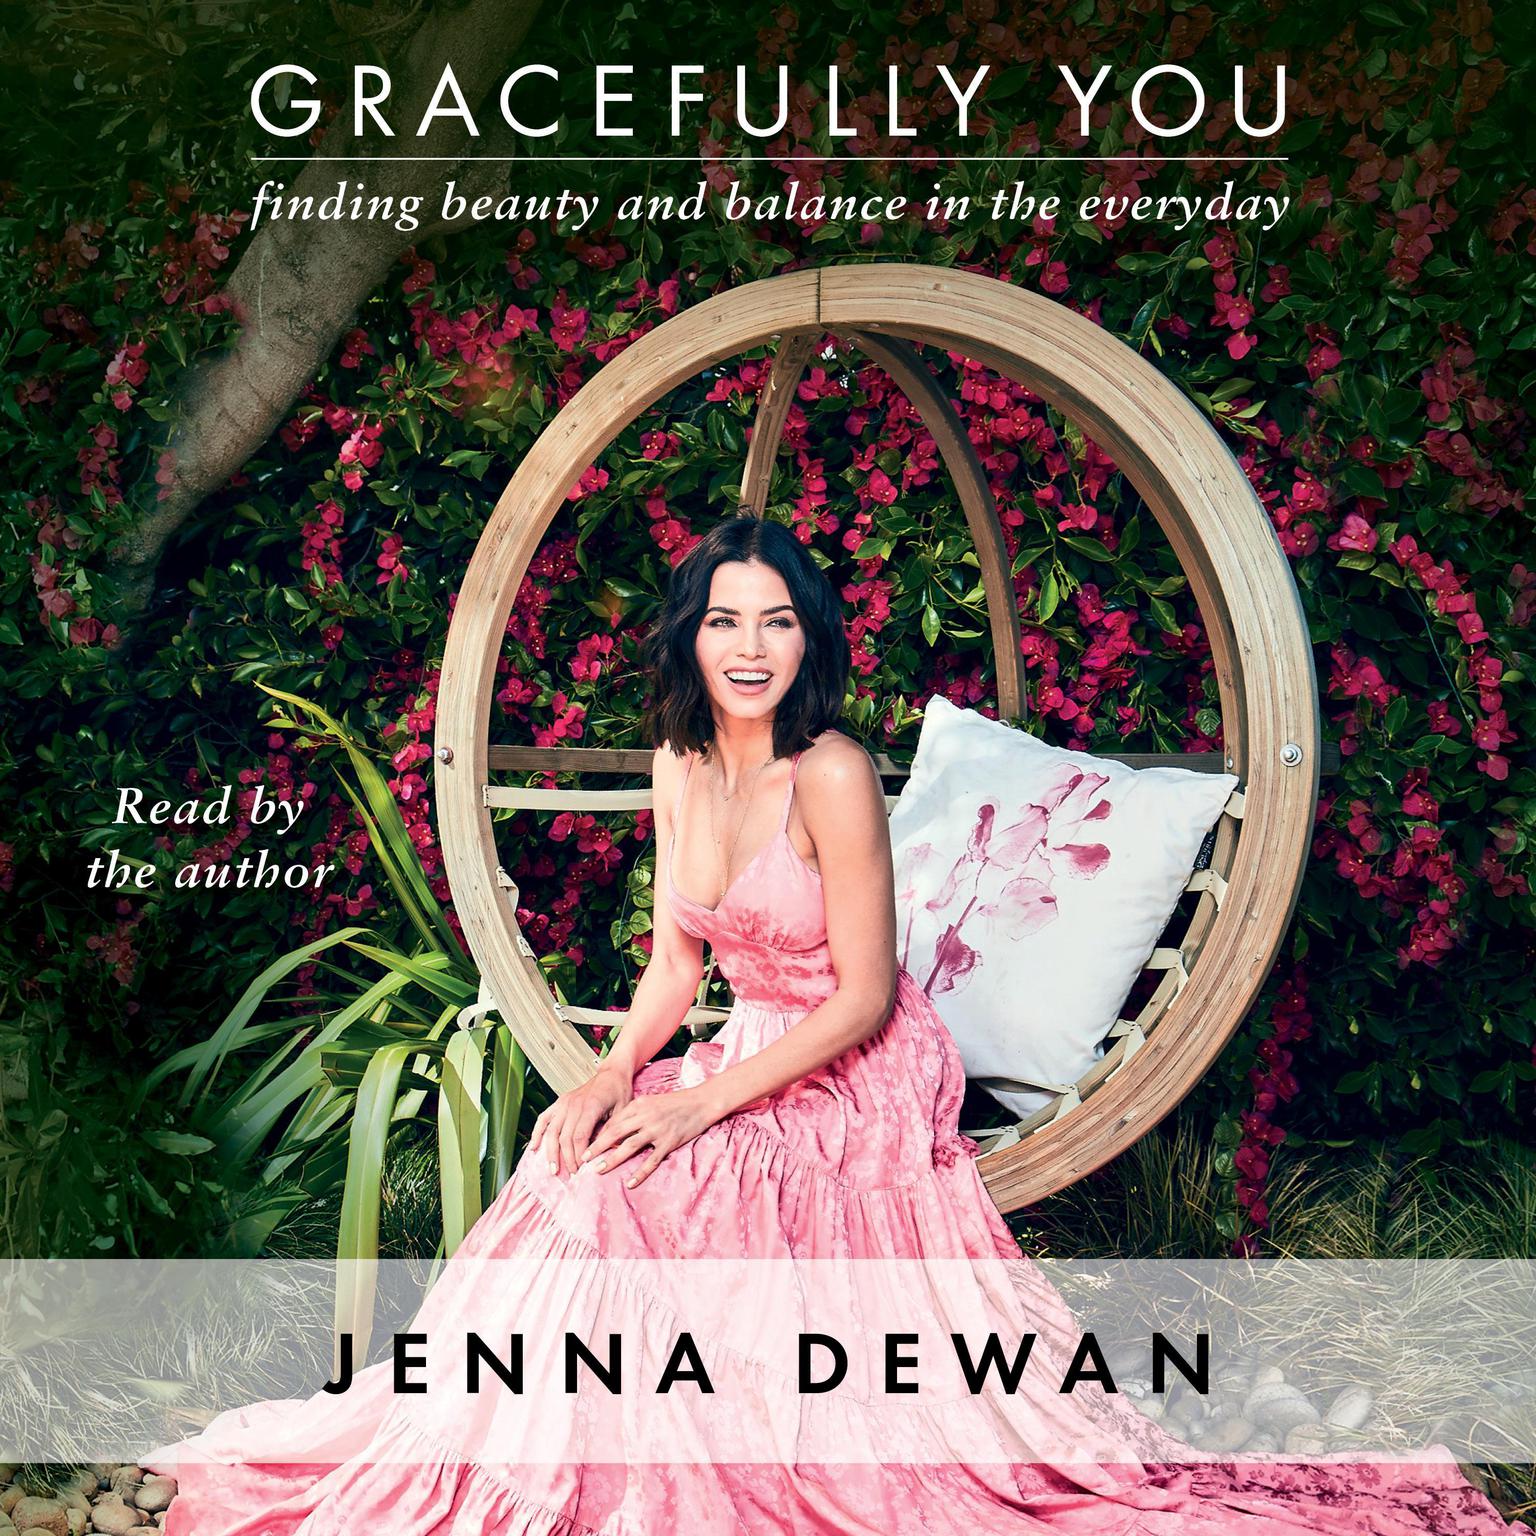 Gracefully You: Finding Beauty and Balance in the Everyday Audiobook, by Jenna Dewan